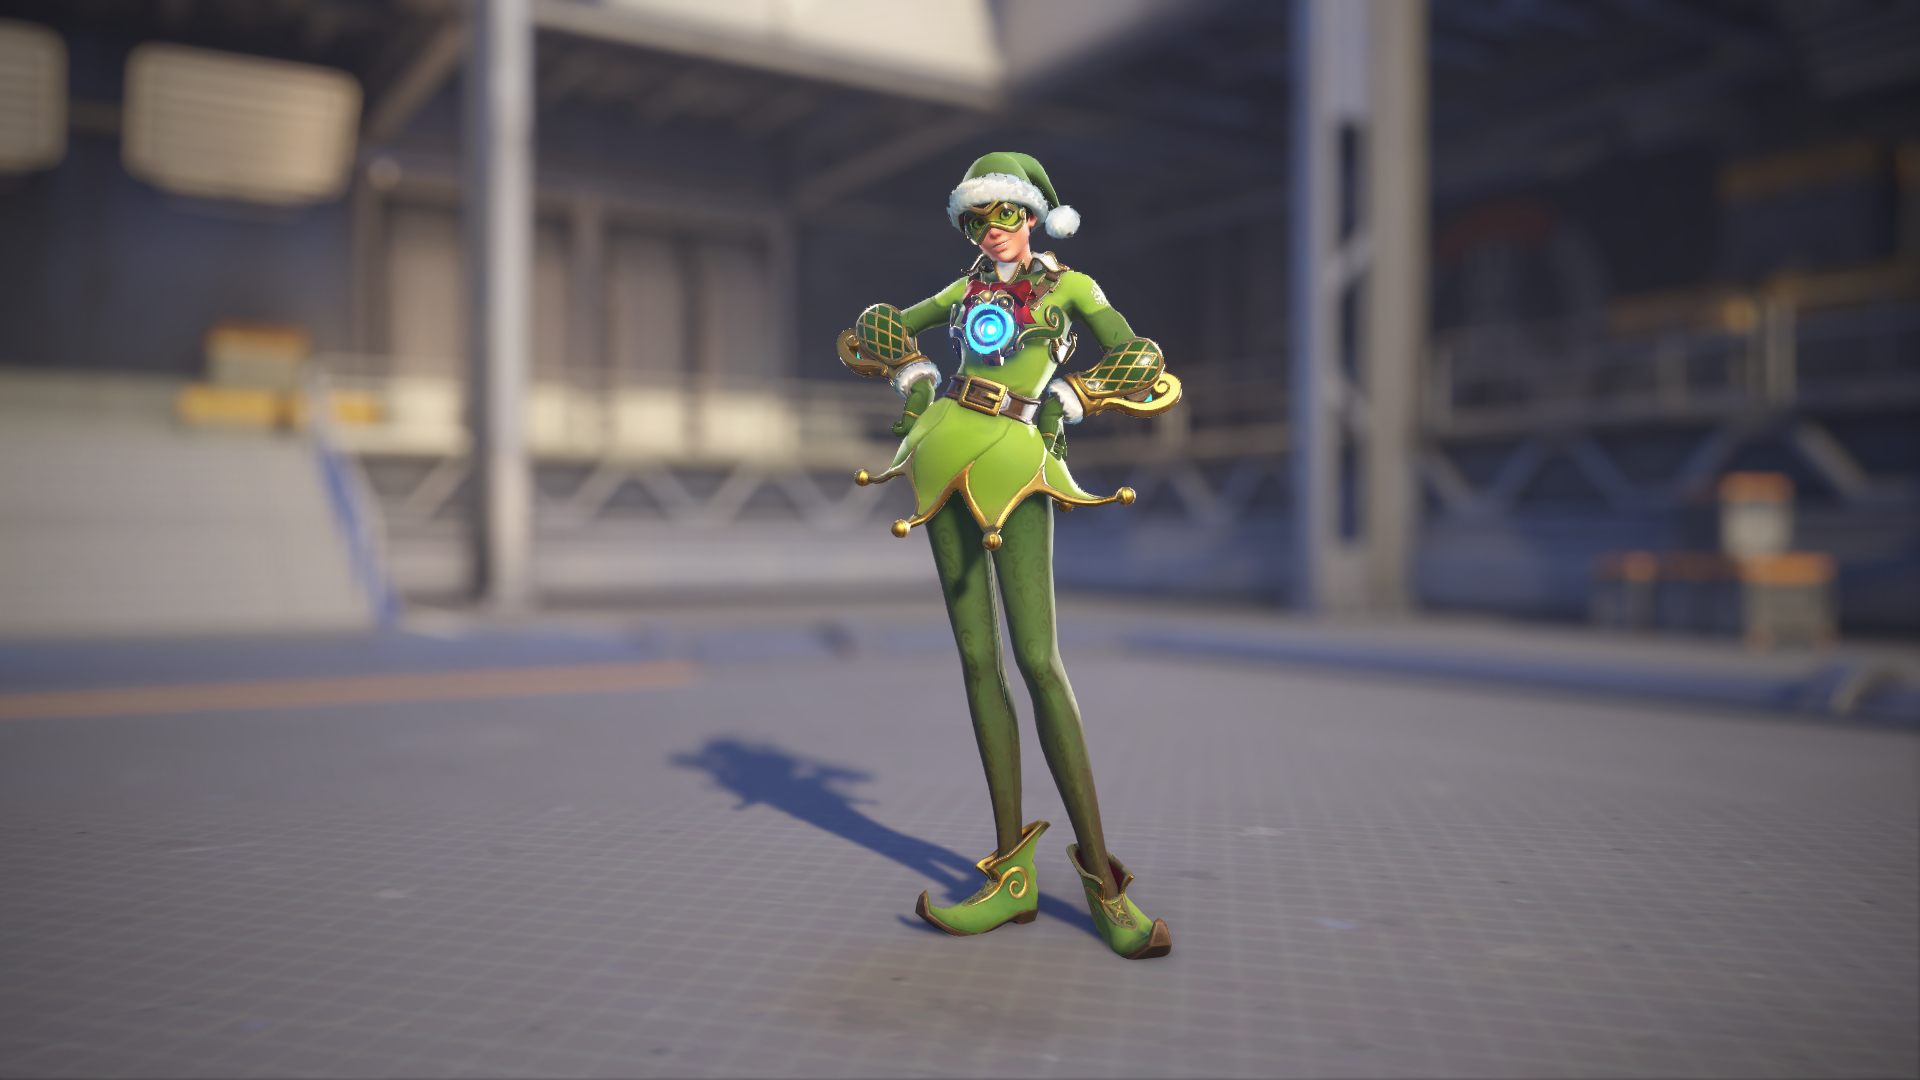 Tracer models her Jingle skin in Overwatch 2.